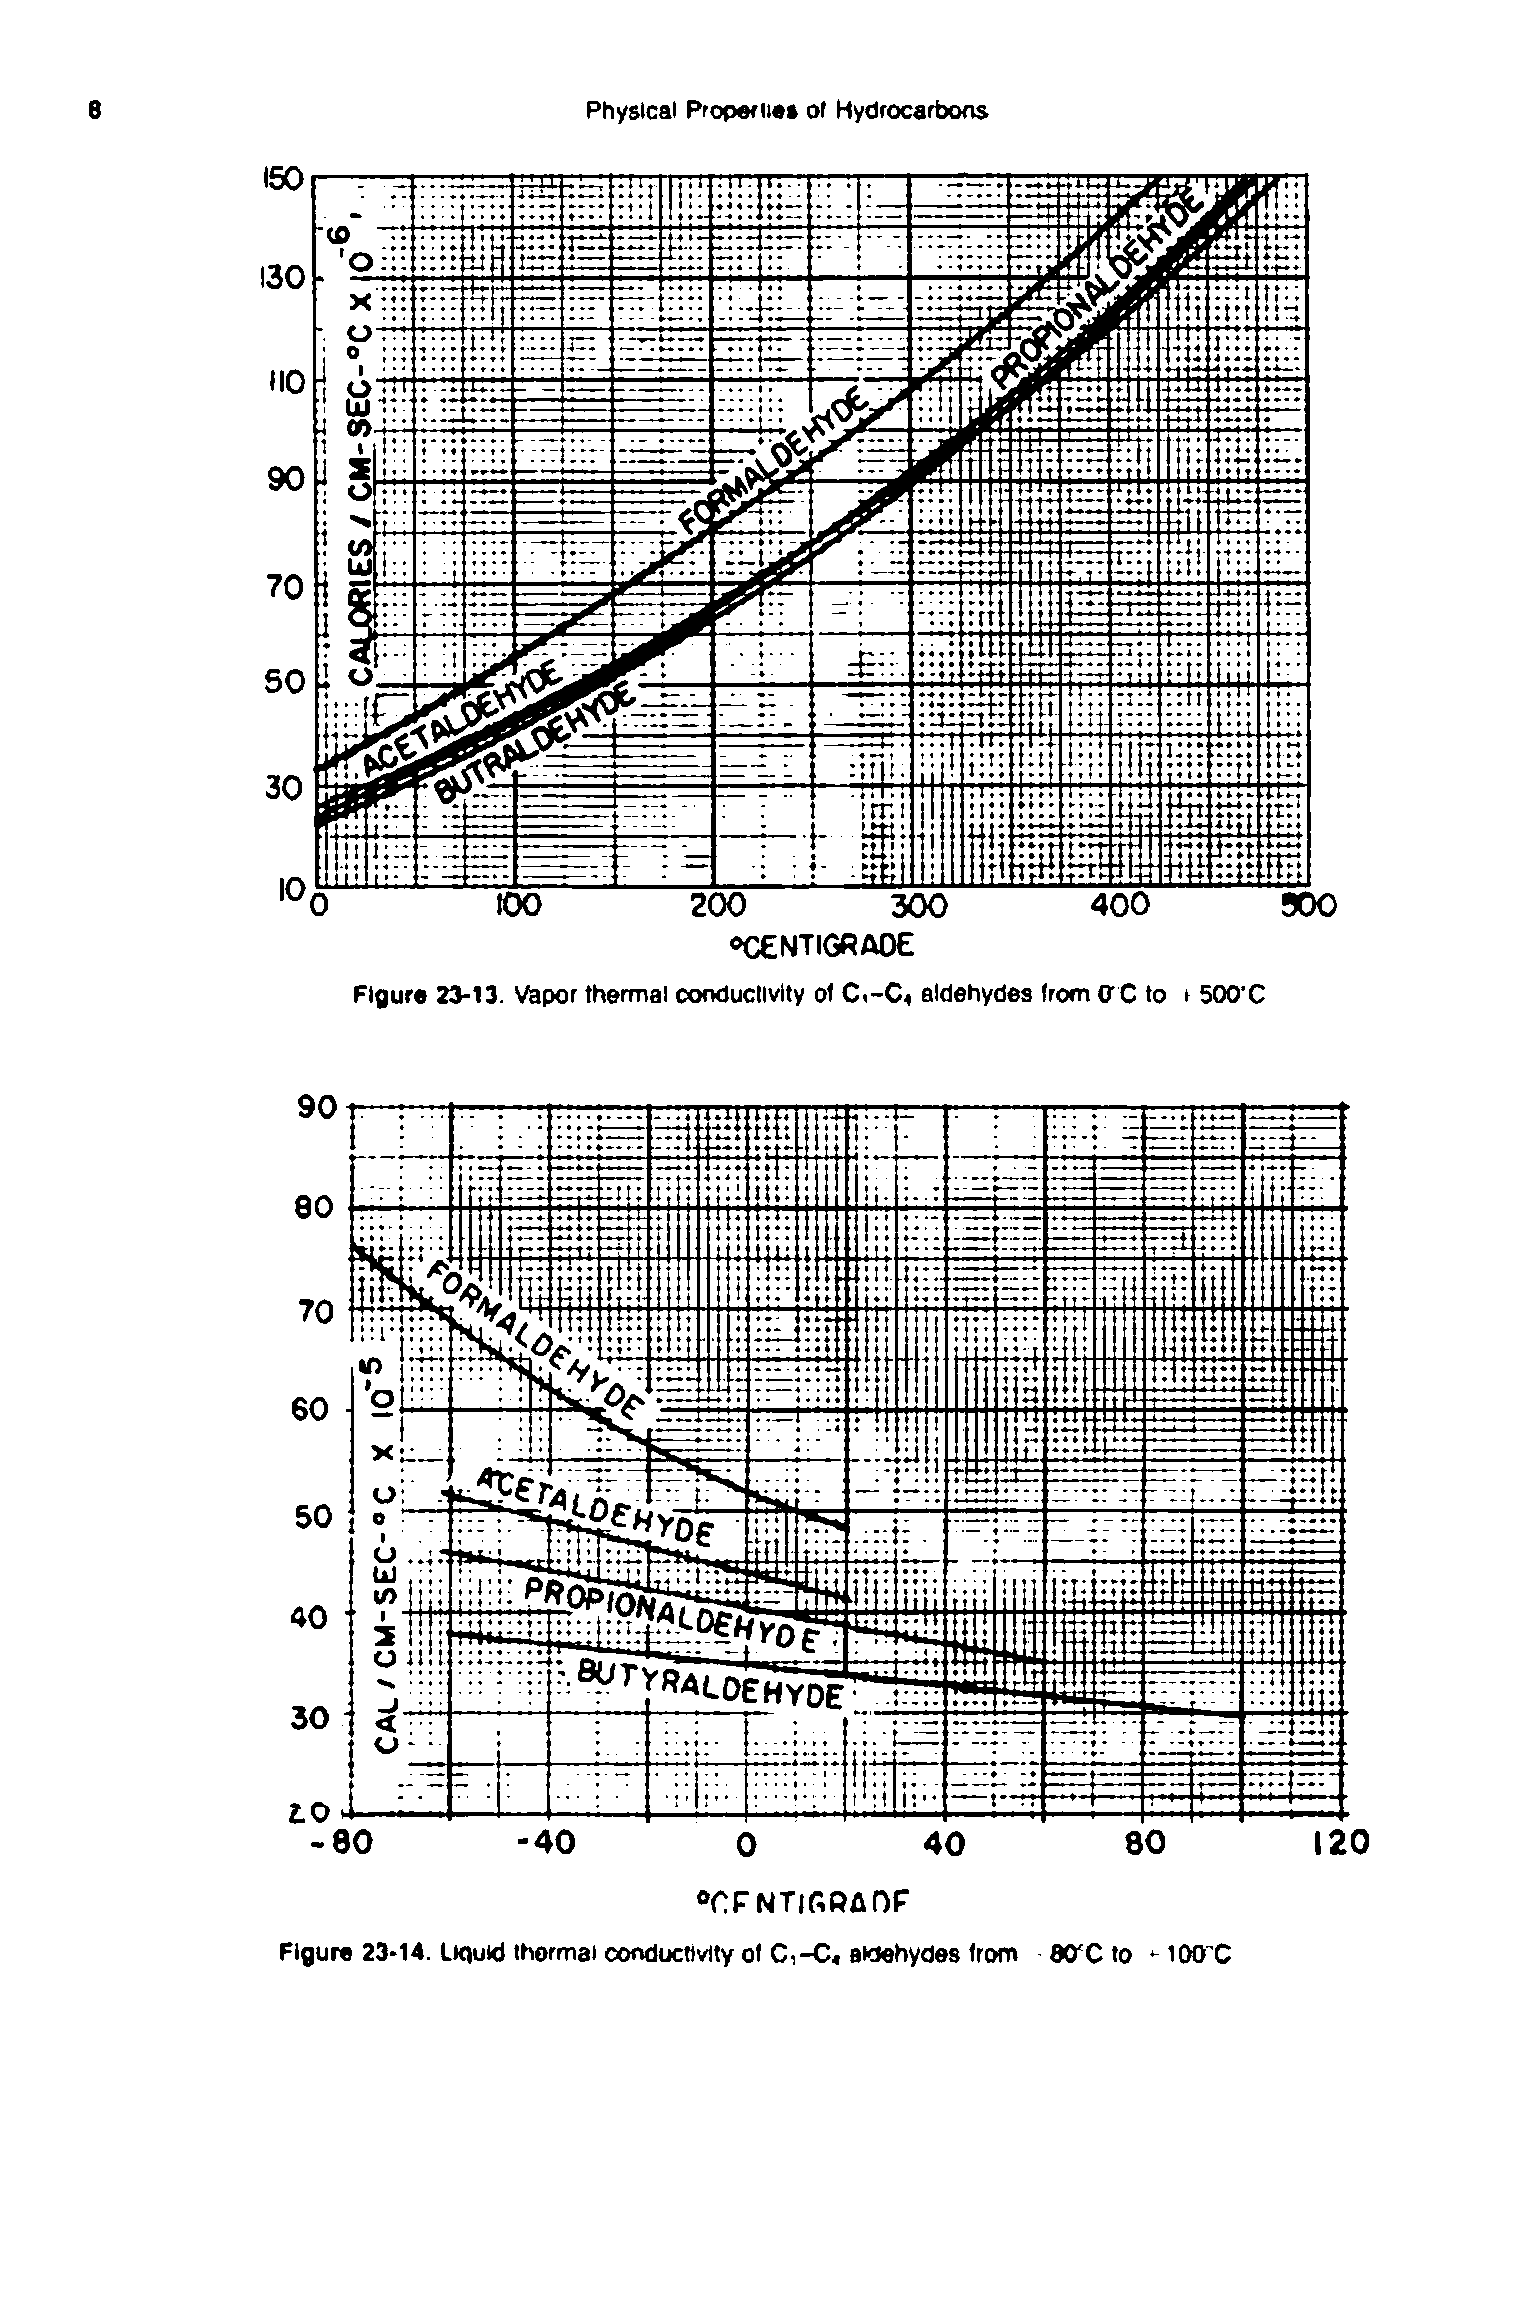 Figure 23-13. Vapor thermal conductivity of C<-C aldehydes from OX to i 500 C...